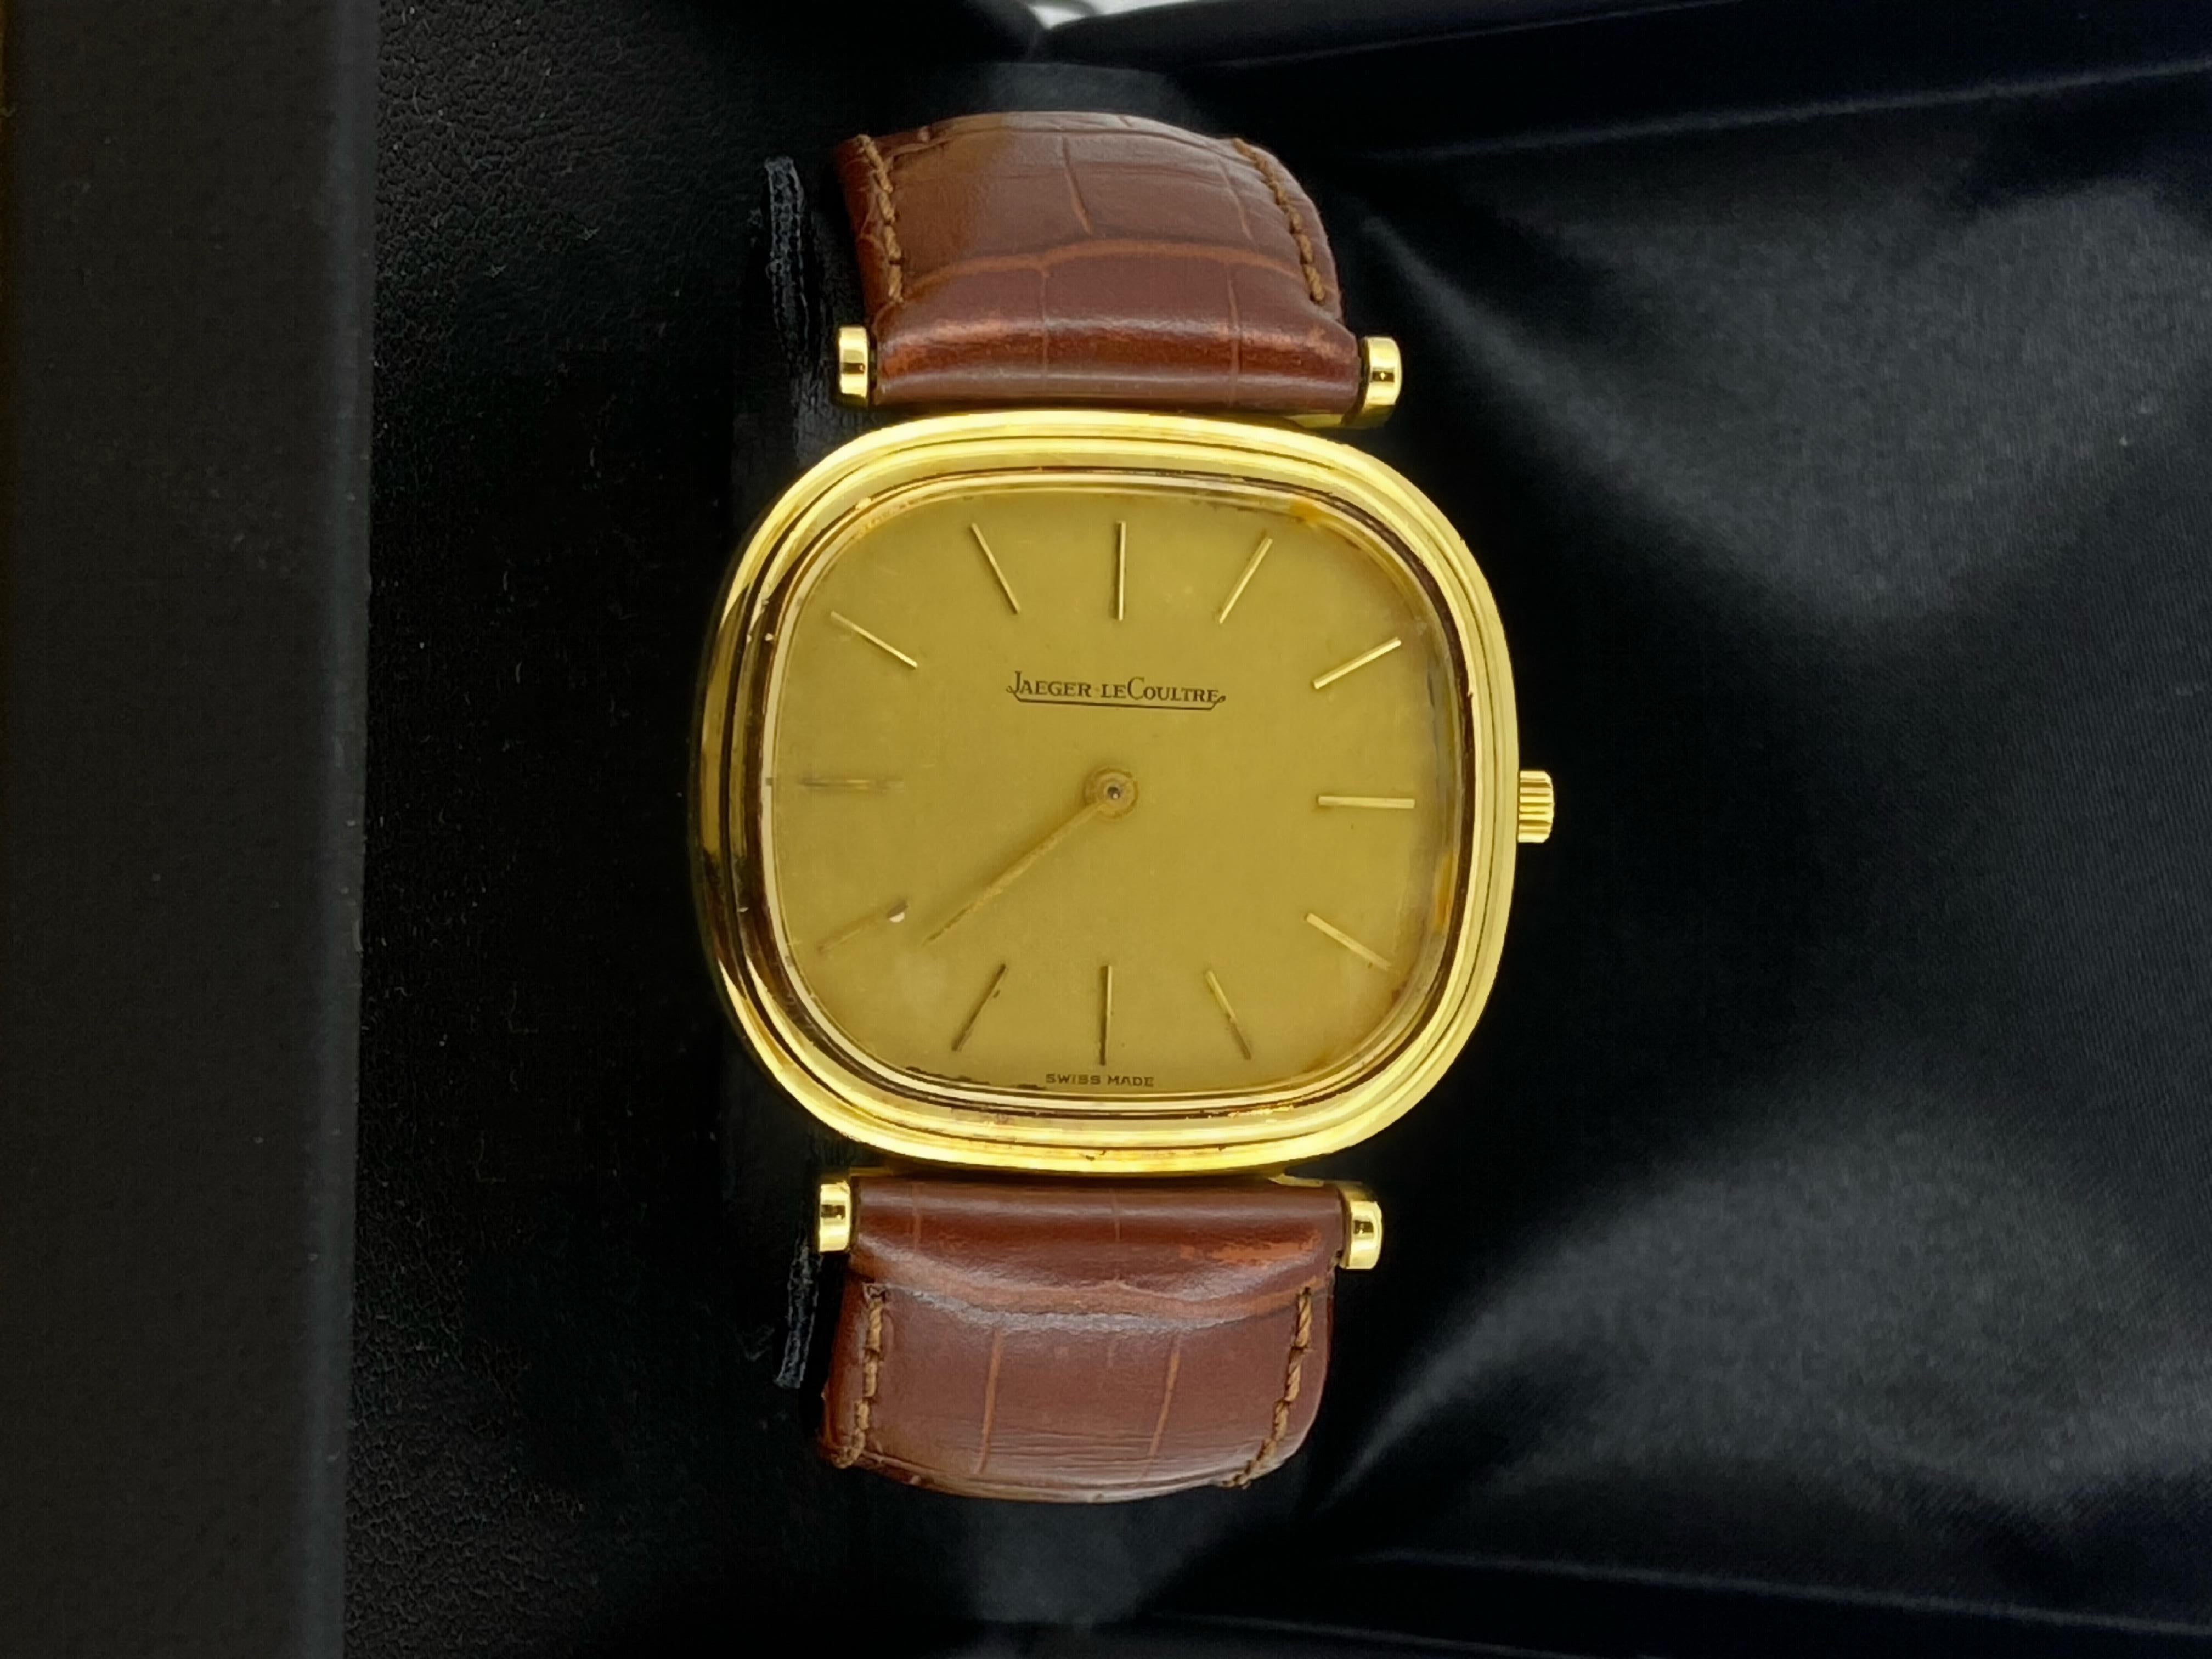 18K Gold Jaeger Le-Coultre ref 9132 Cushion Case Manual 17 jewels Cal 818 Watch For Sale 2